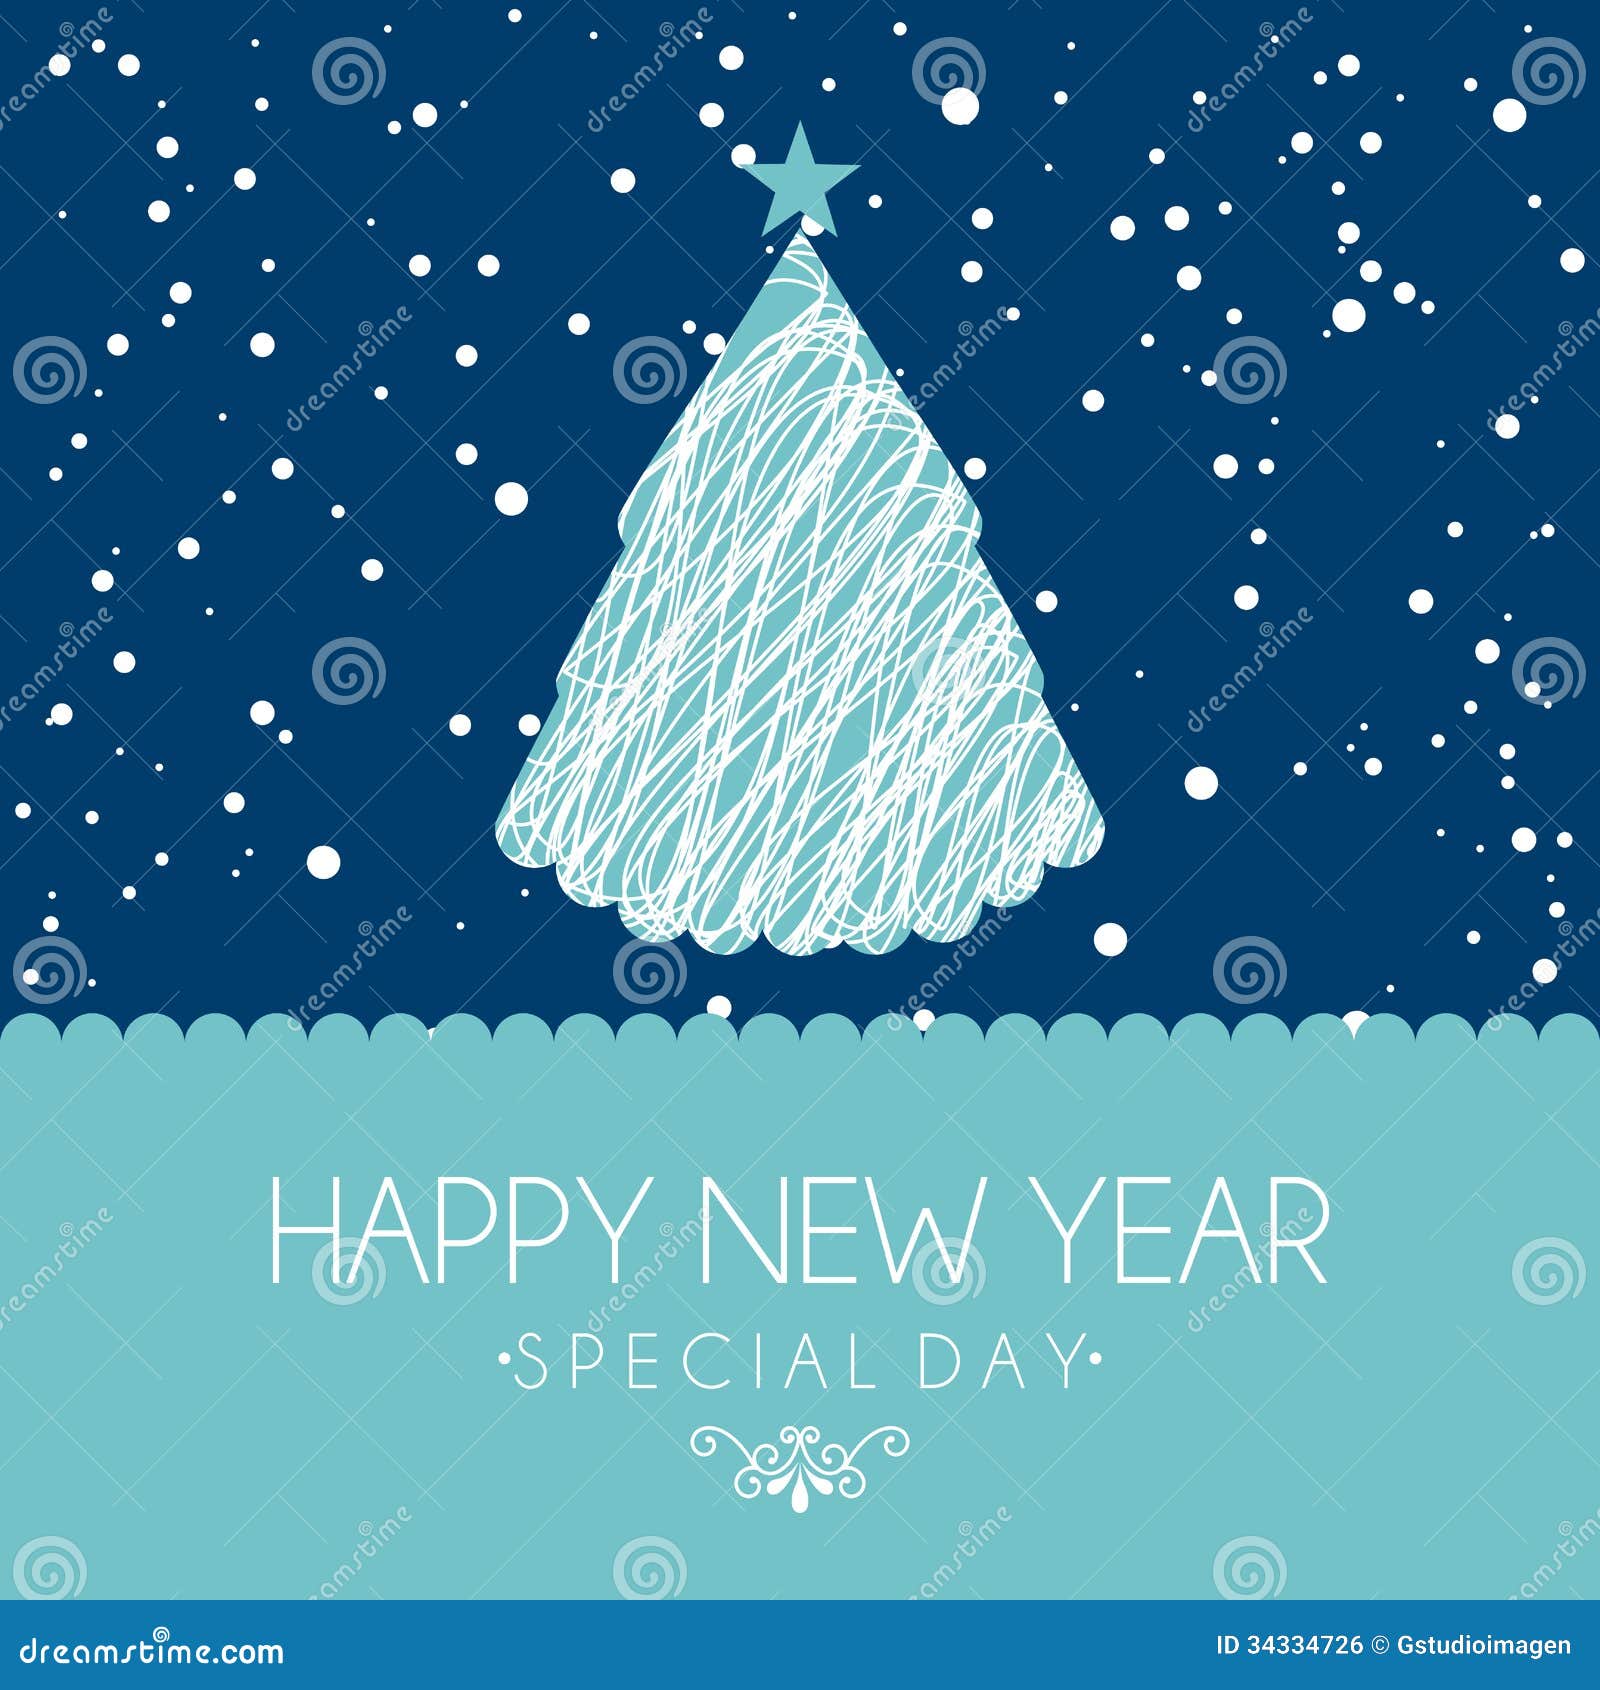 free animated clipart happy new year 2014 - photo #41